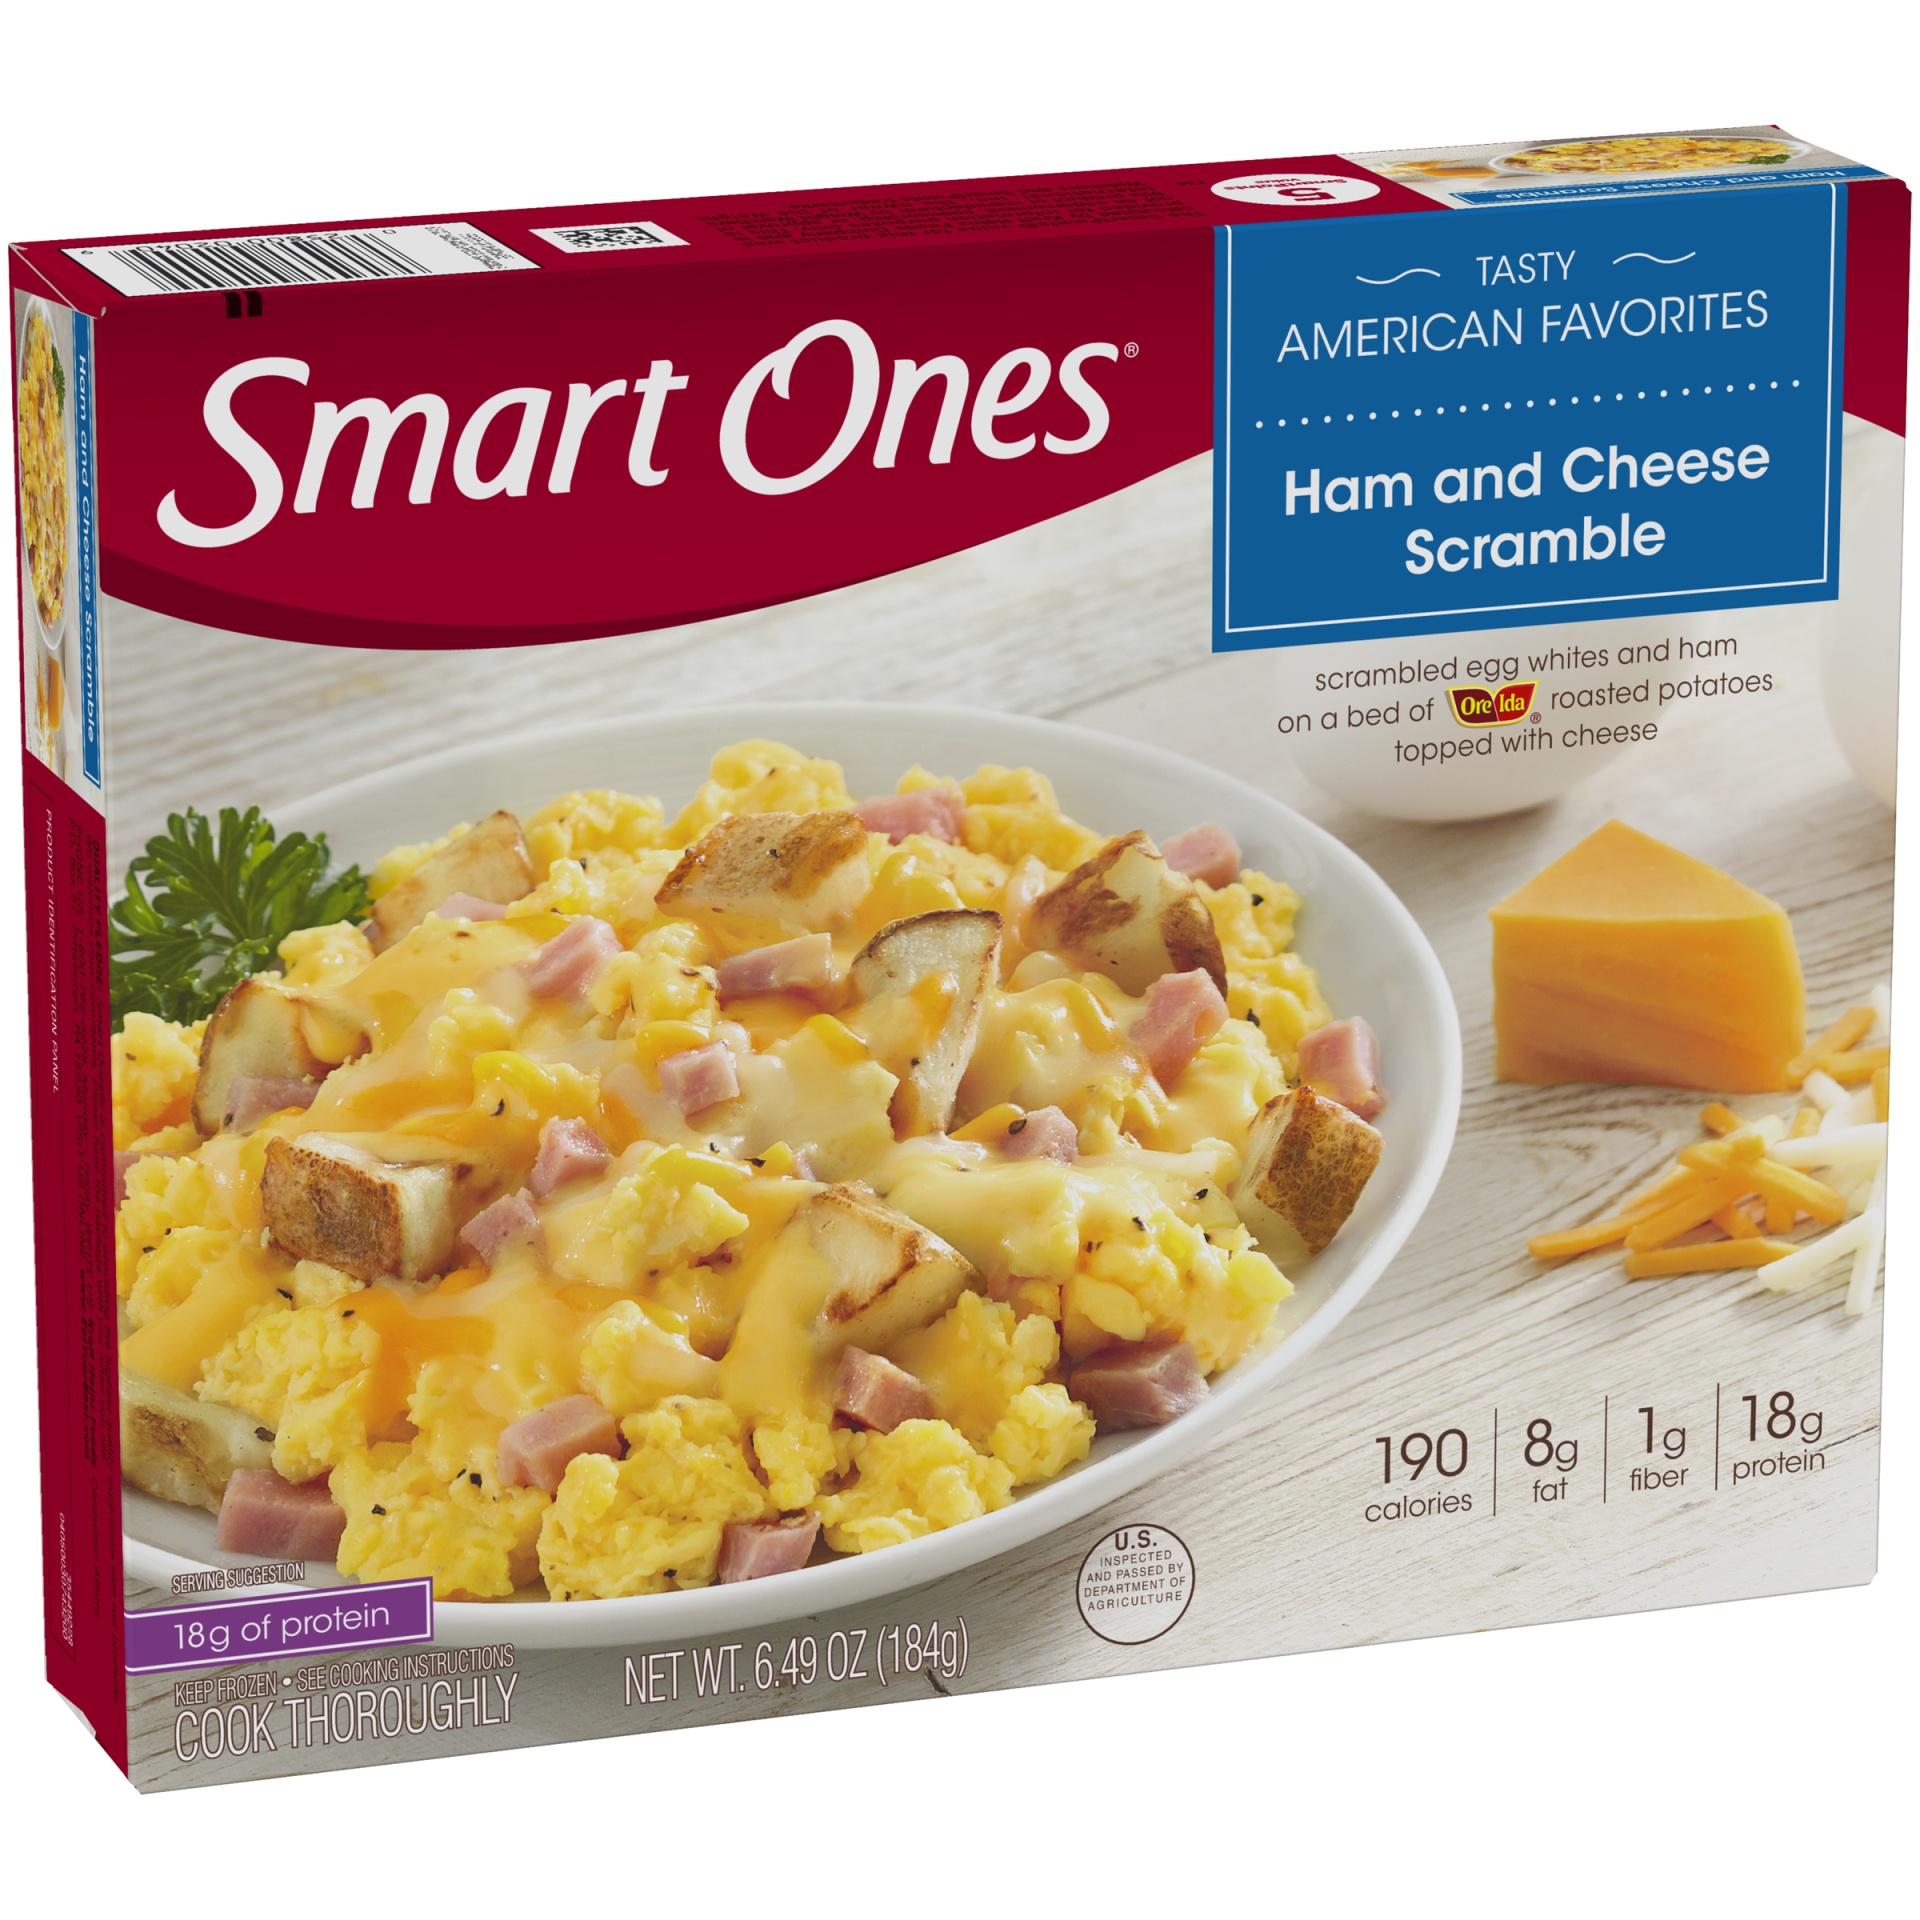 slide 6 of 10, Smart Ones Ham & Cheese Scramble with Egg Whites, Ham, Potatoes & Cheese Frozen Meal, 6.49 oz